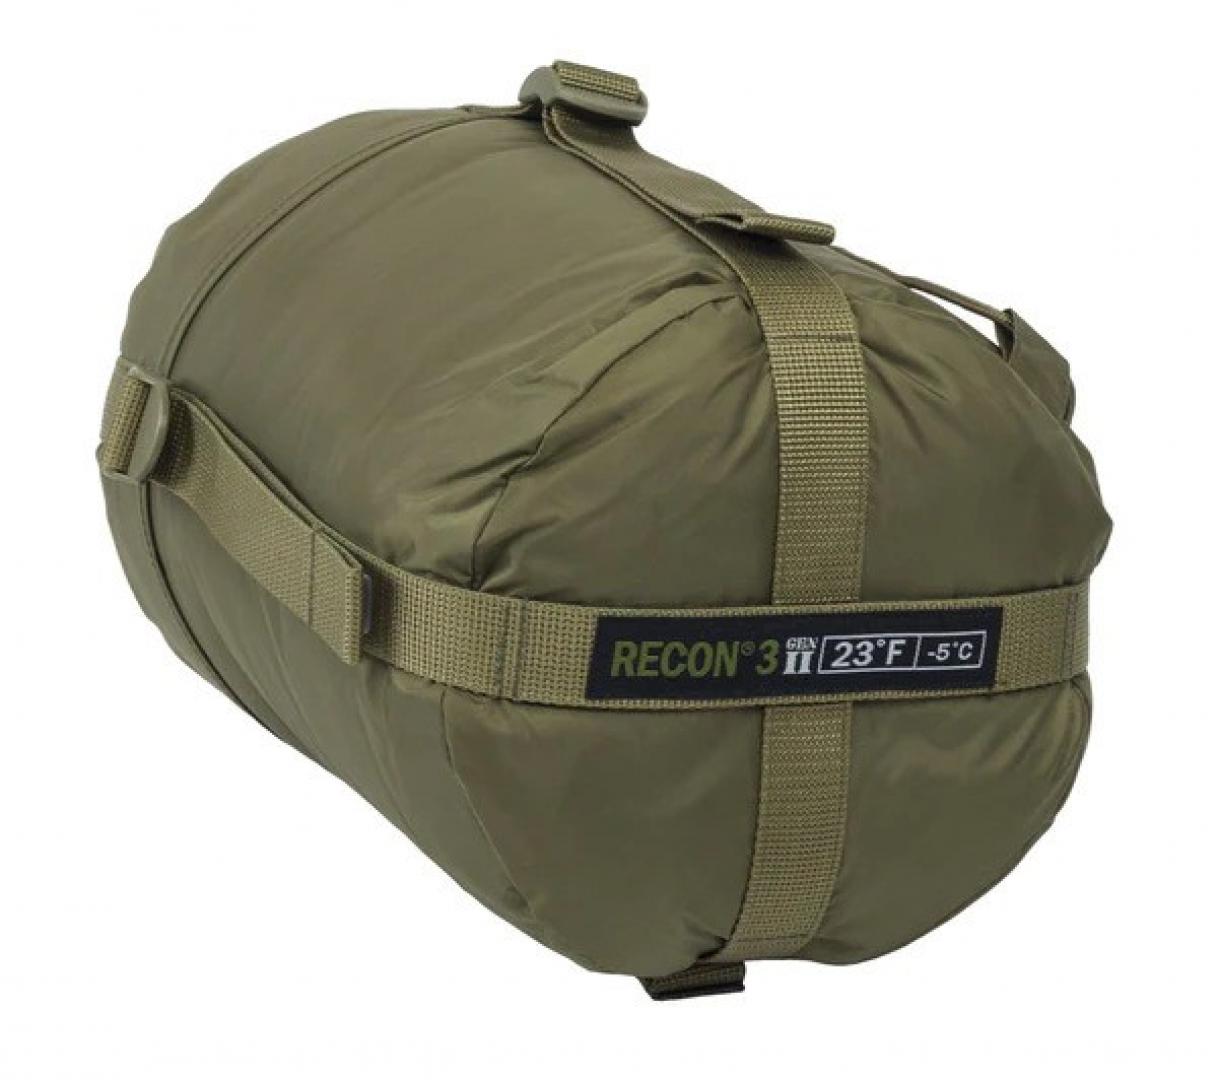 Recon 3 Sleeping Bags from Elite Survival Systems: Built tough for U.S. Forces